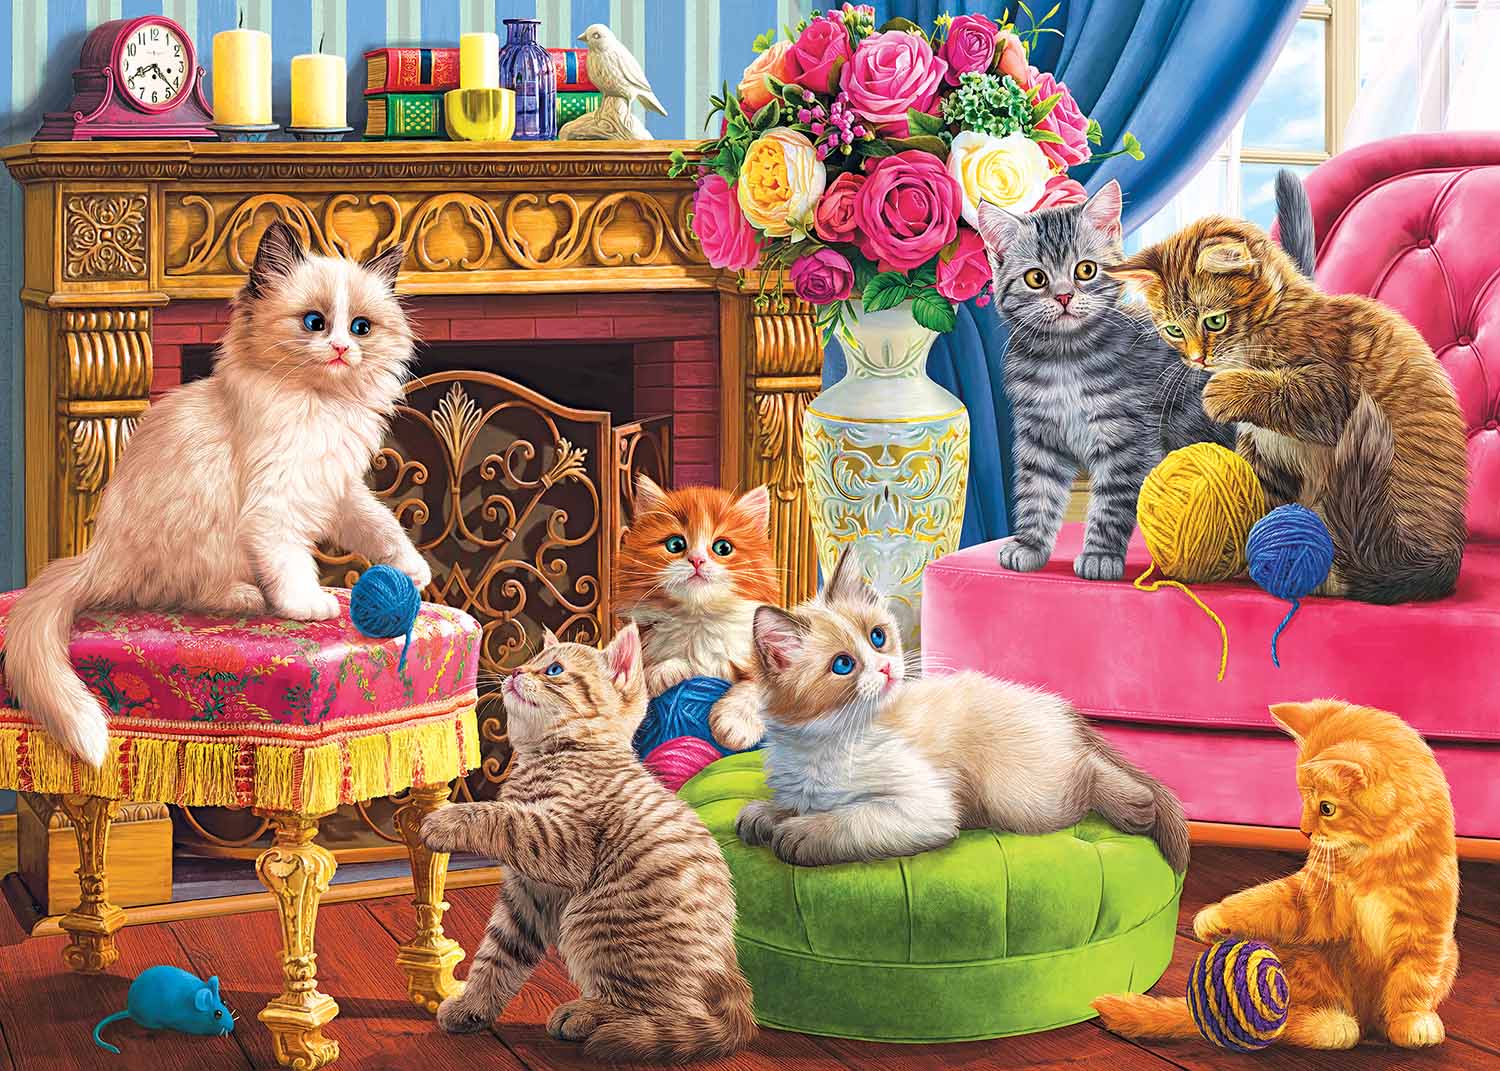 Kittens by the Fireplace Cats Jigsaw Puzzle